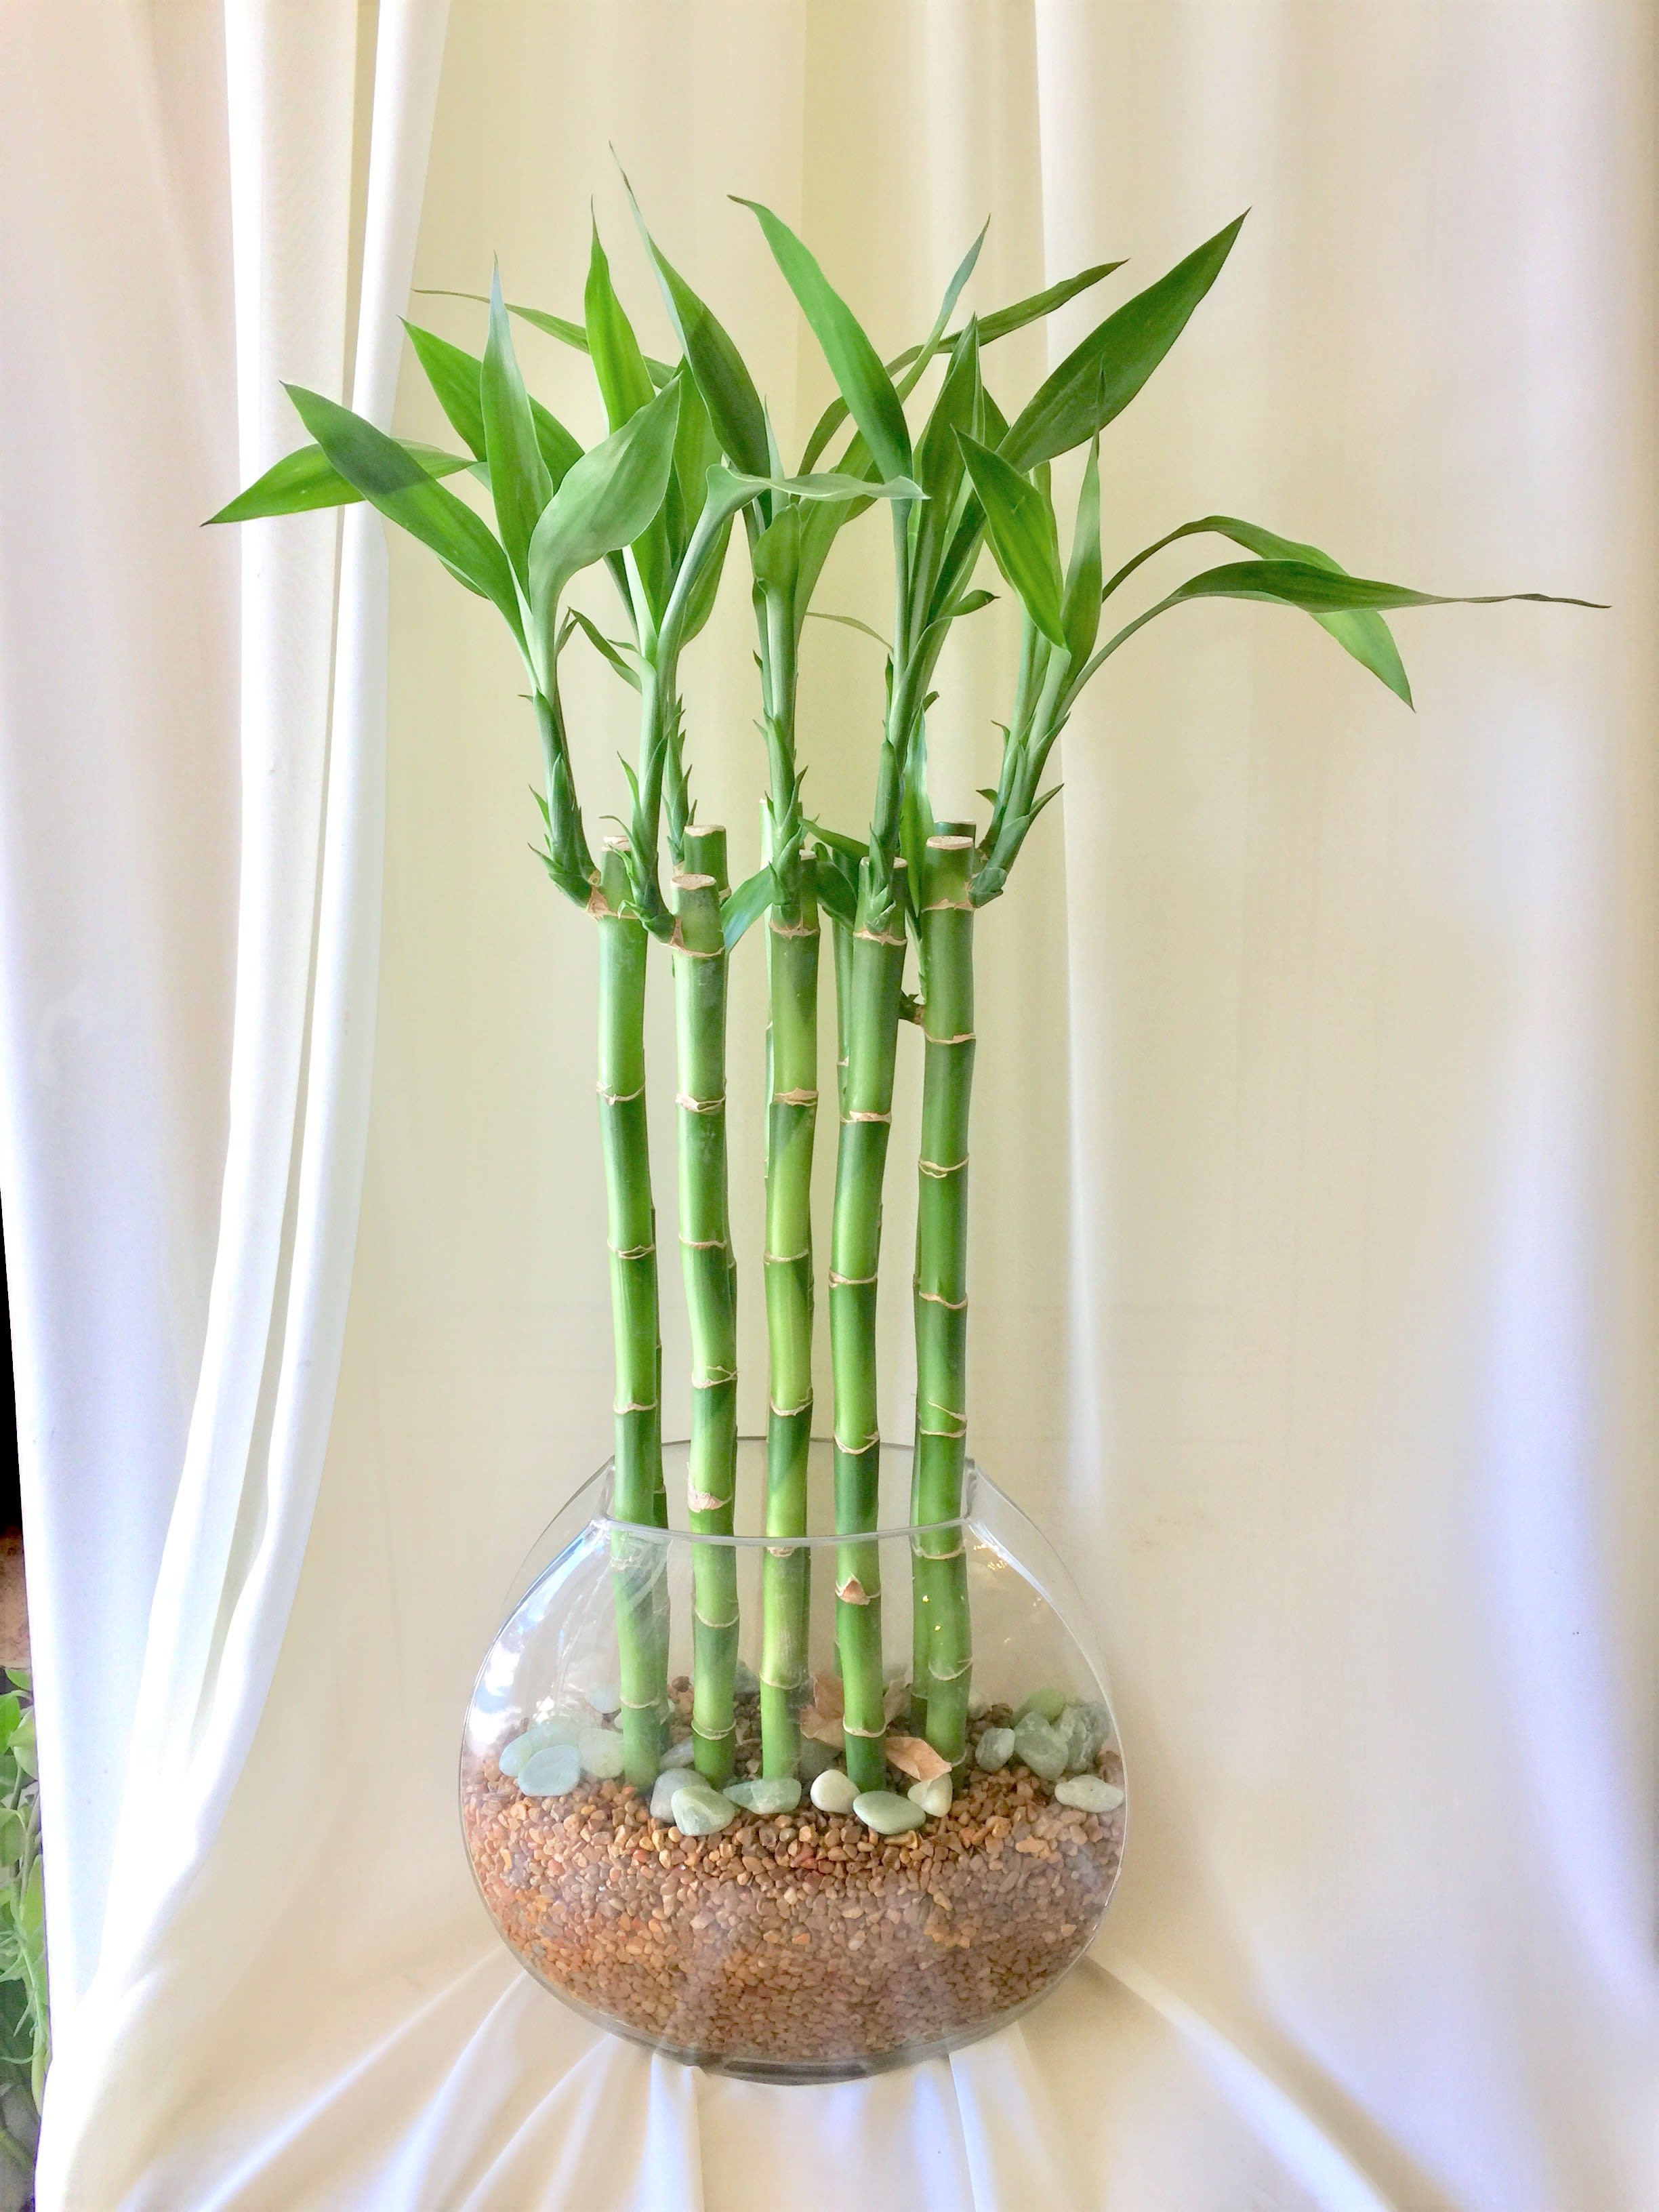 Lucky Bamboo - Healthy and fresh lucky bamboo planted in a clean and simple design, great for any space.